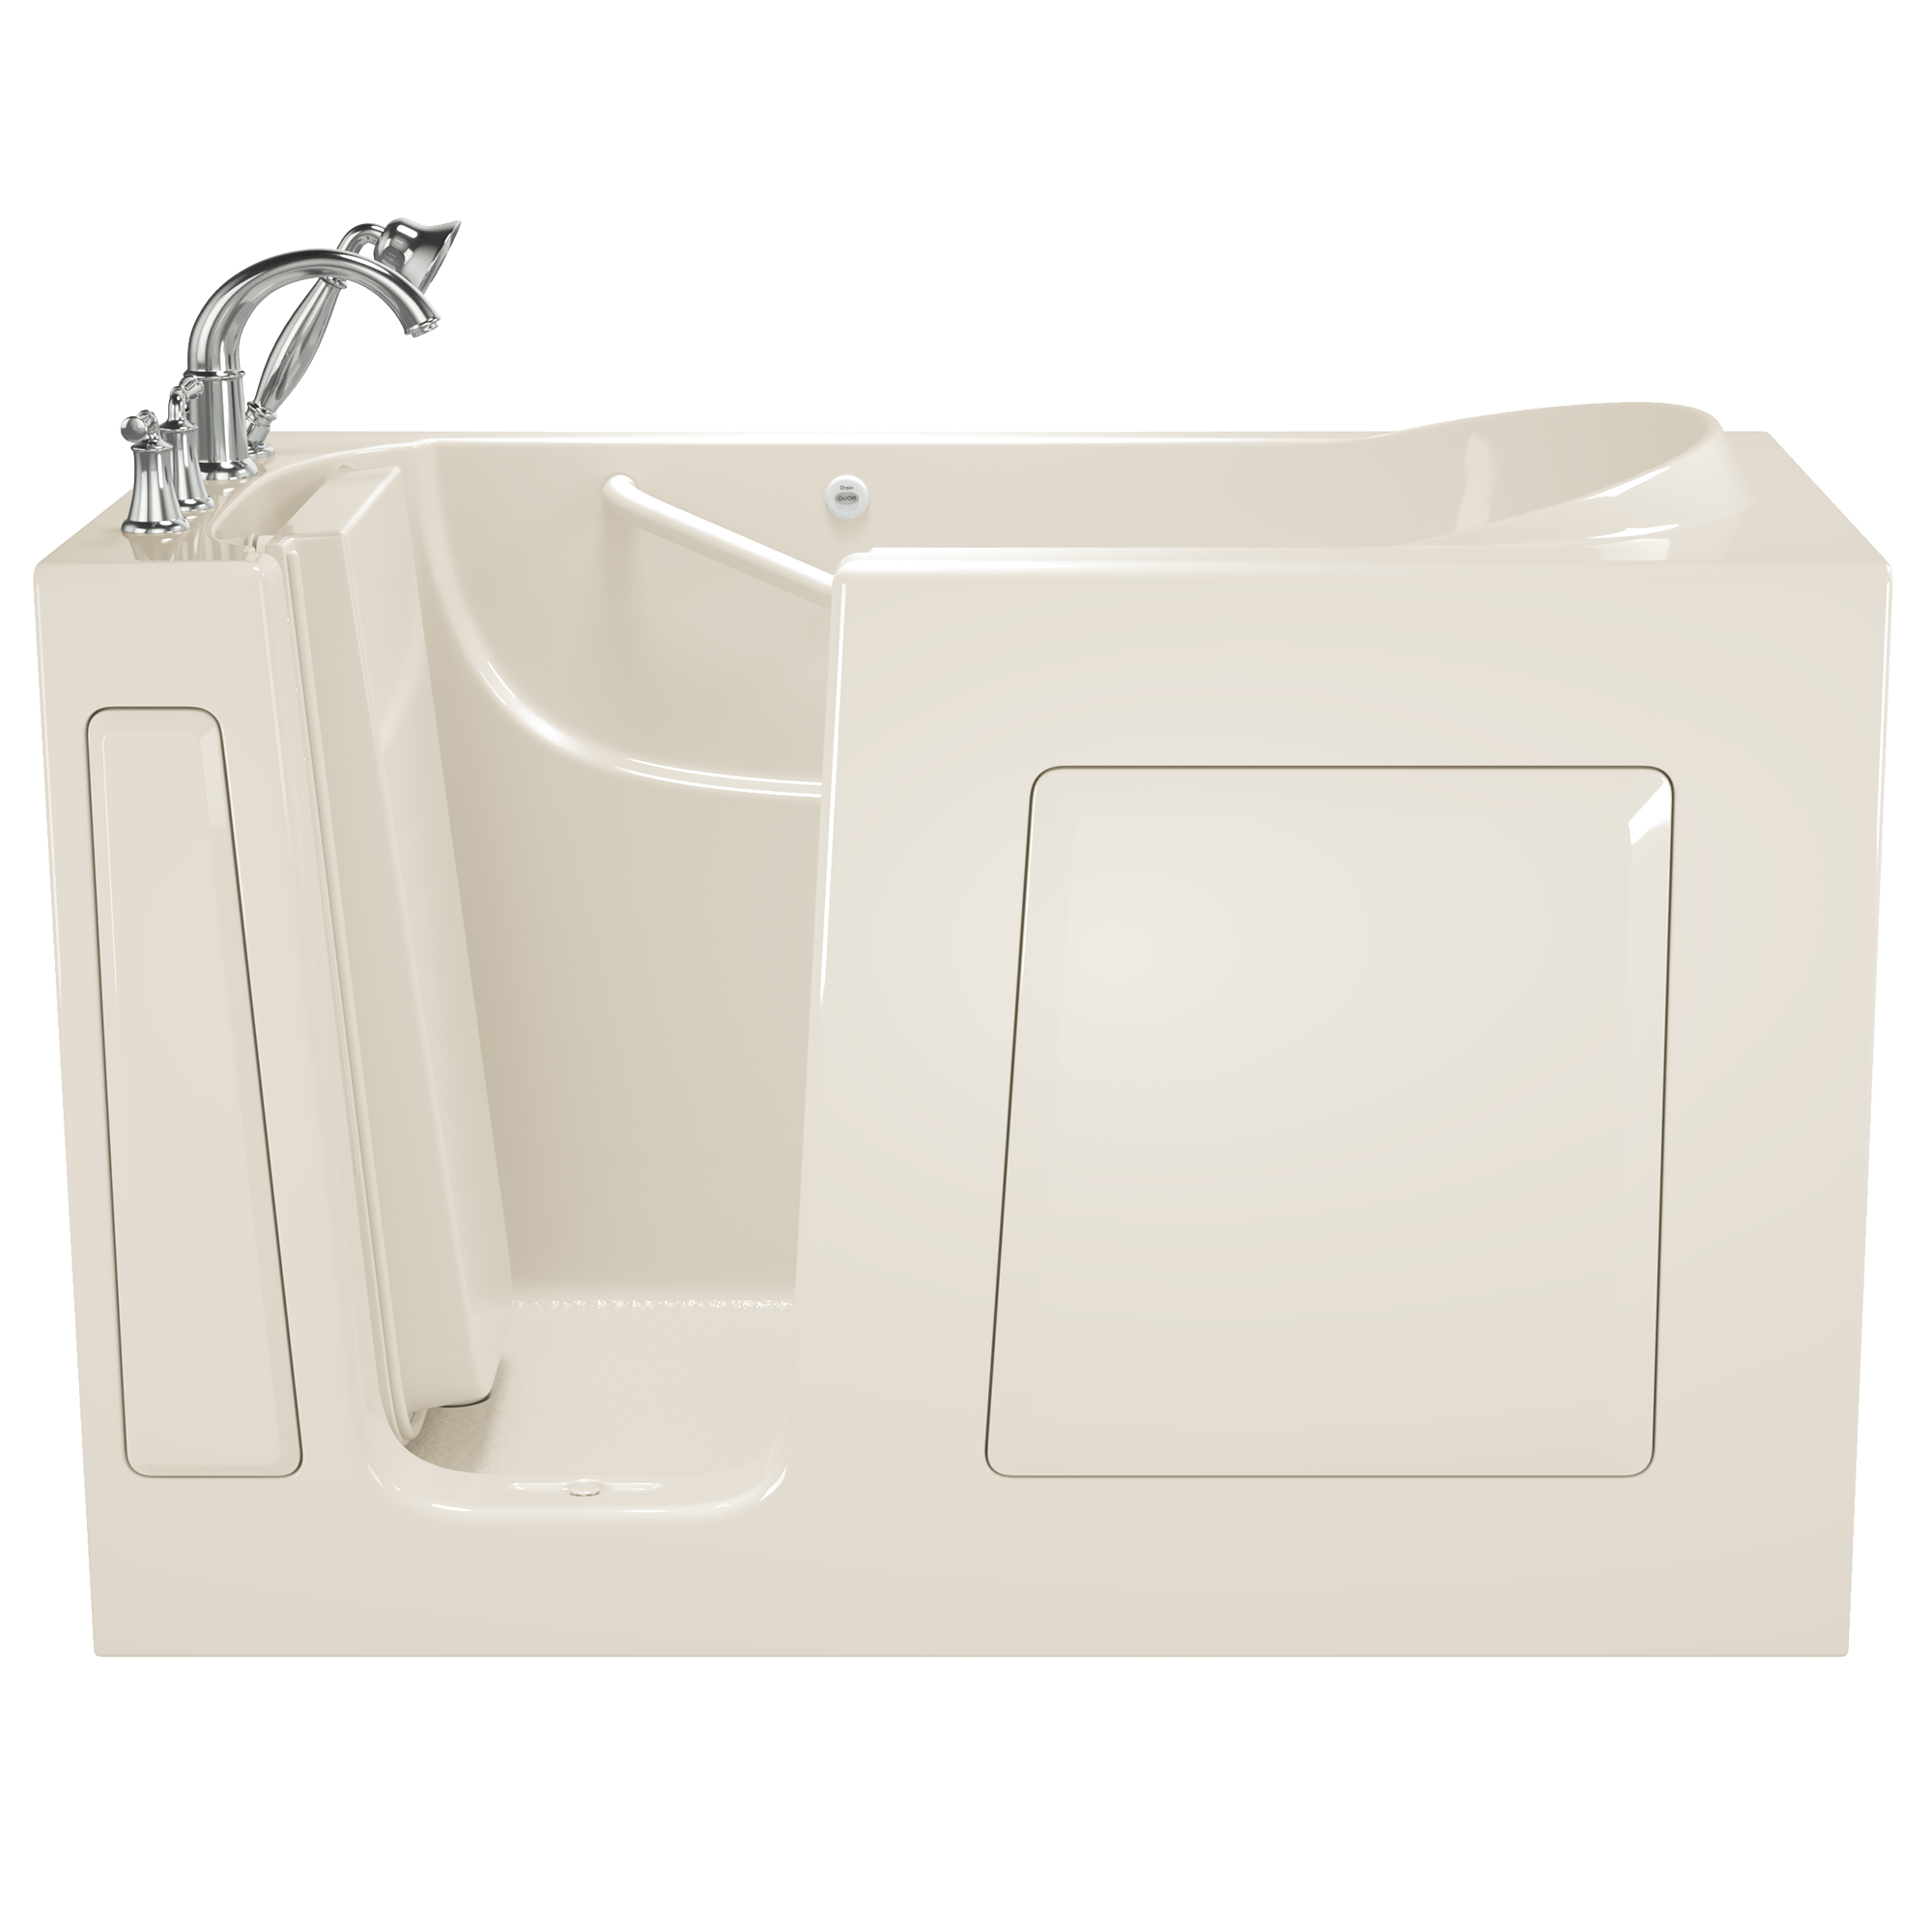 Gelcoat Value Series 30 x 60  Inch Walk in Tub With Soaker System   Left Hand Drain With Faucet WIB LINEN